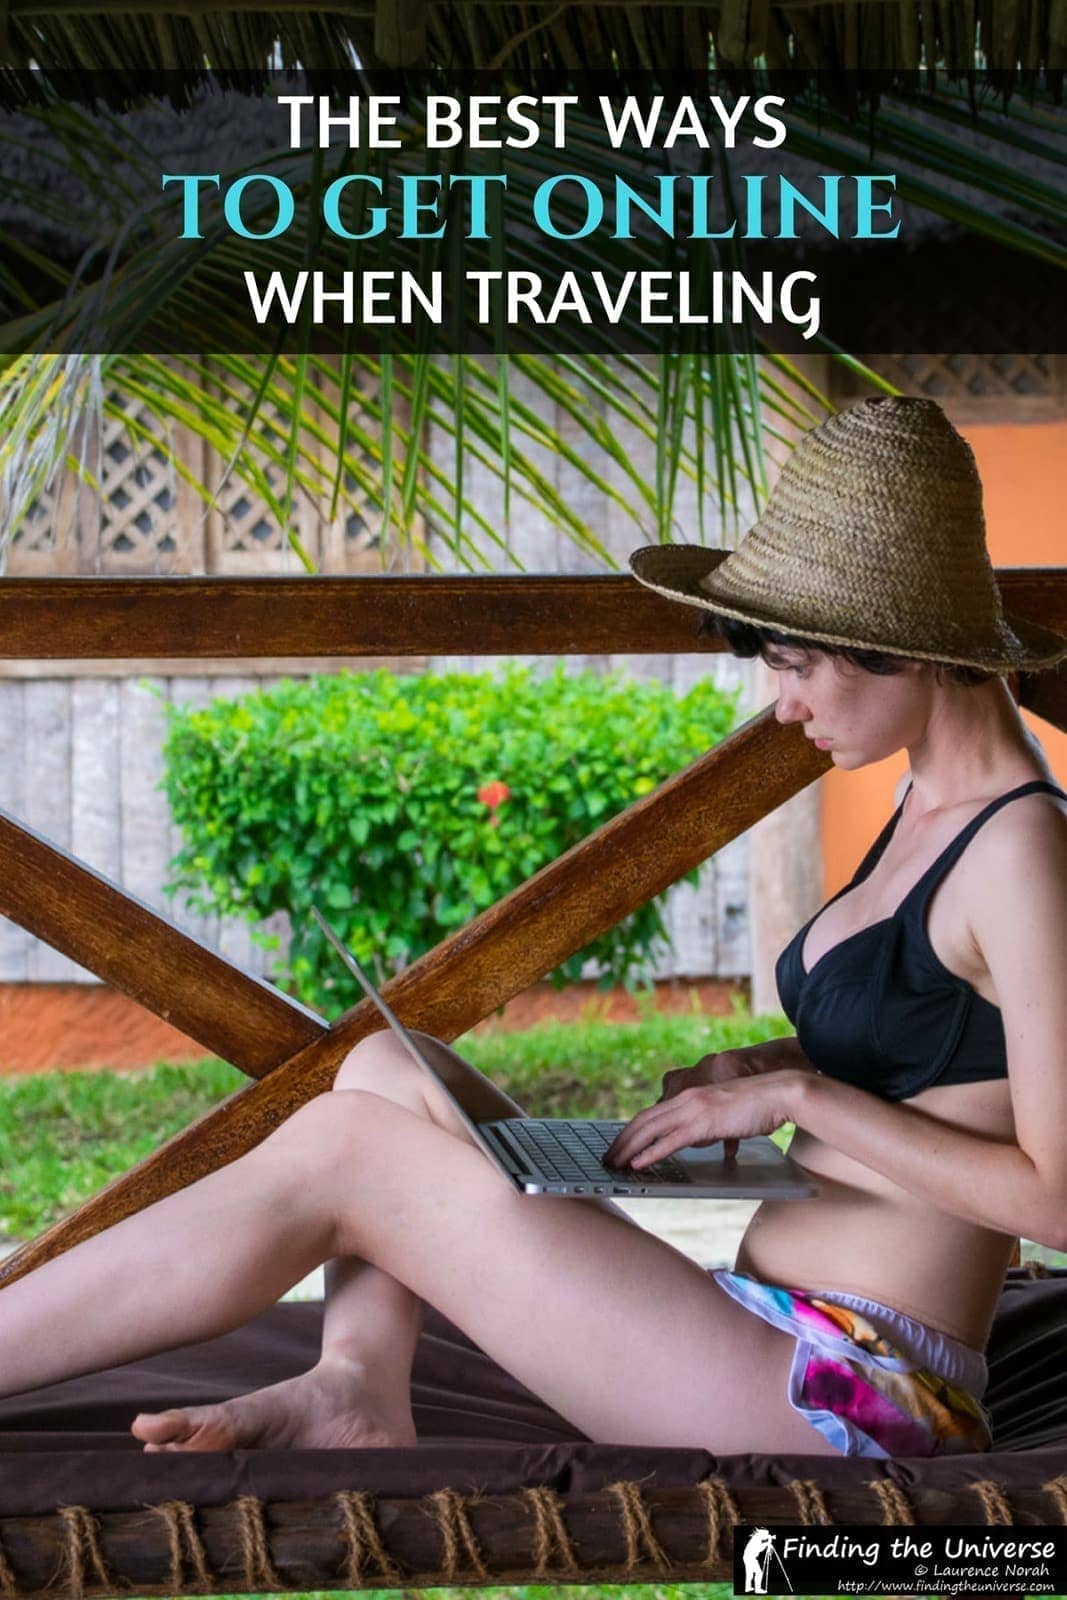 Everything you need to know about getting connected to the internet and online when you're traveling the world, with options including travel SIM cards, roaming with your home provider and mobile hotspots, including the advantages and disadvantages of each option.